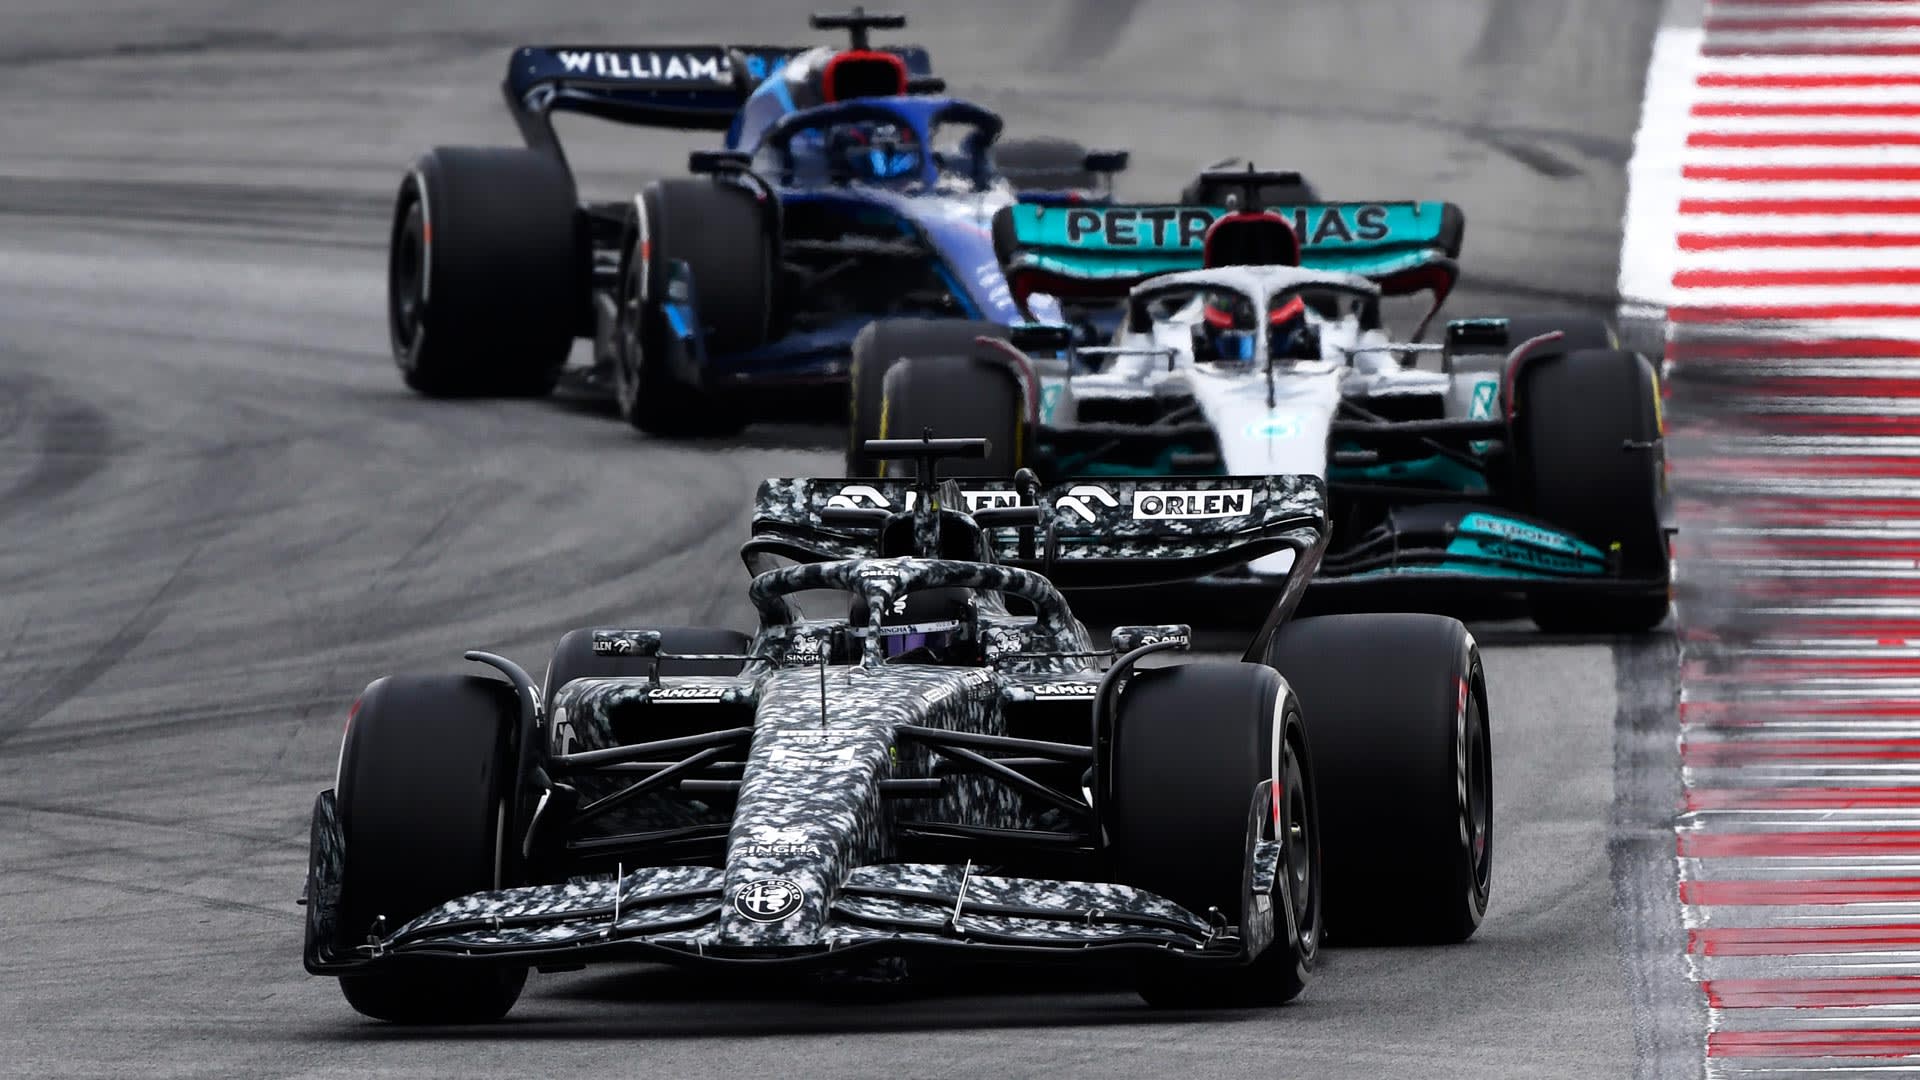 F1 Barcelona pre-season running 2022 How all 10 teams fared after showing off their 2022 cars in Barcelona pre-season running Formula 1®